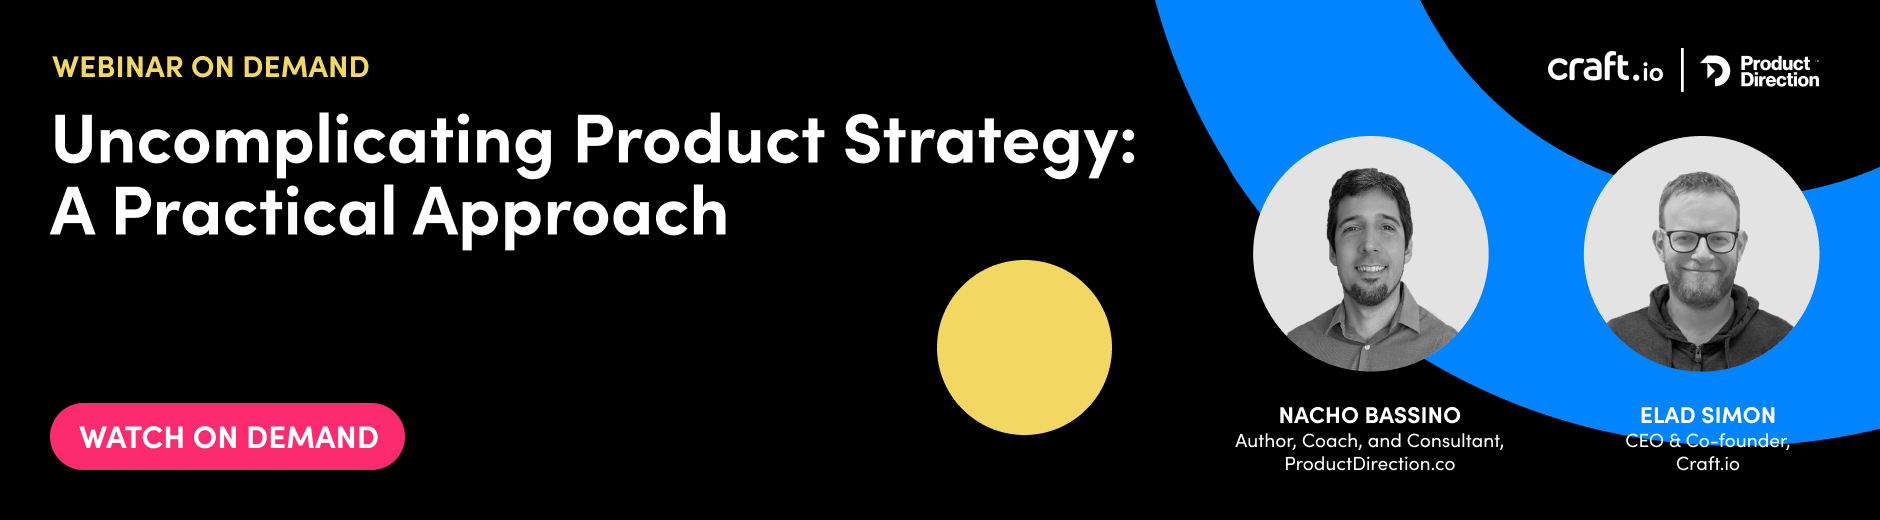 Uncomplicating product strategy: a practical approach